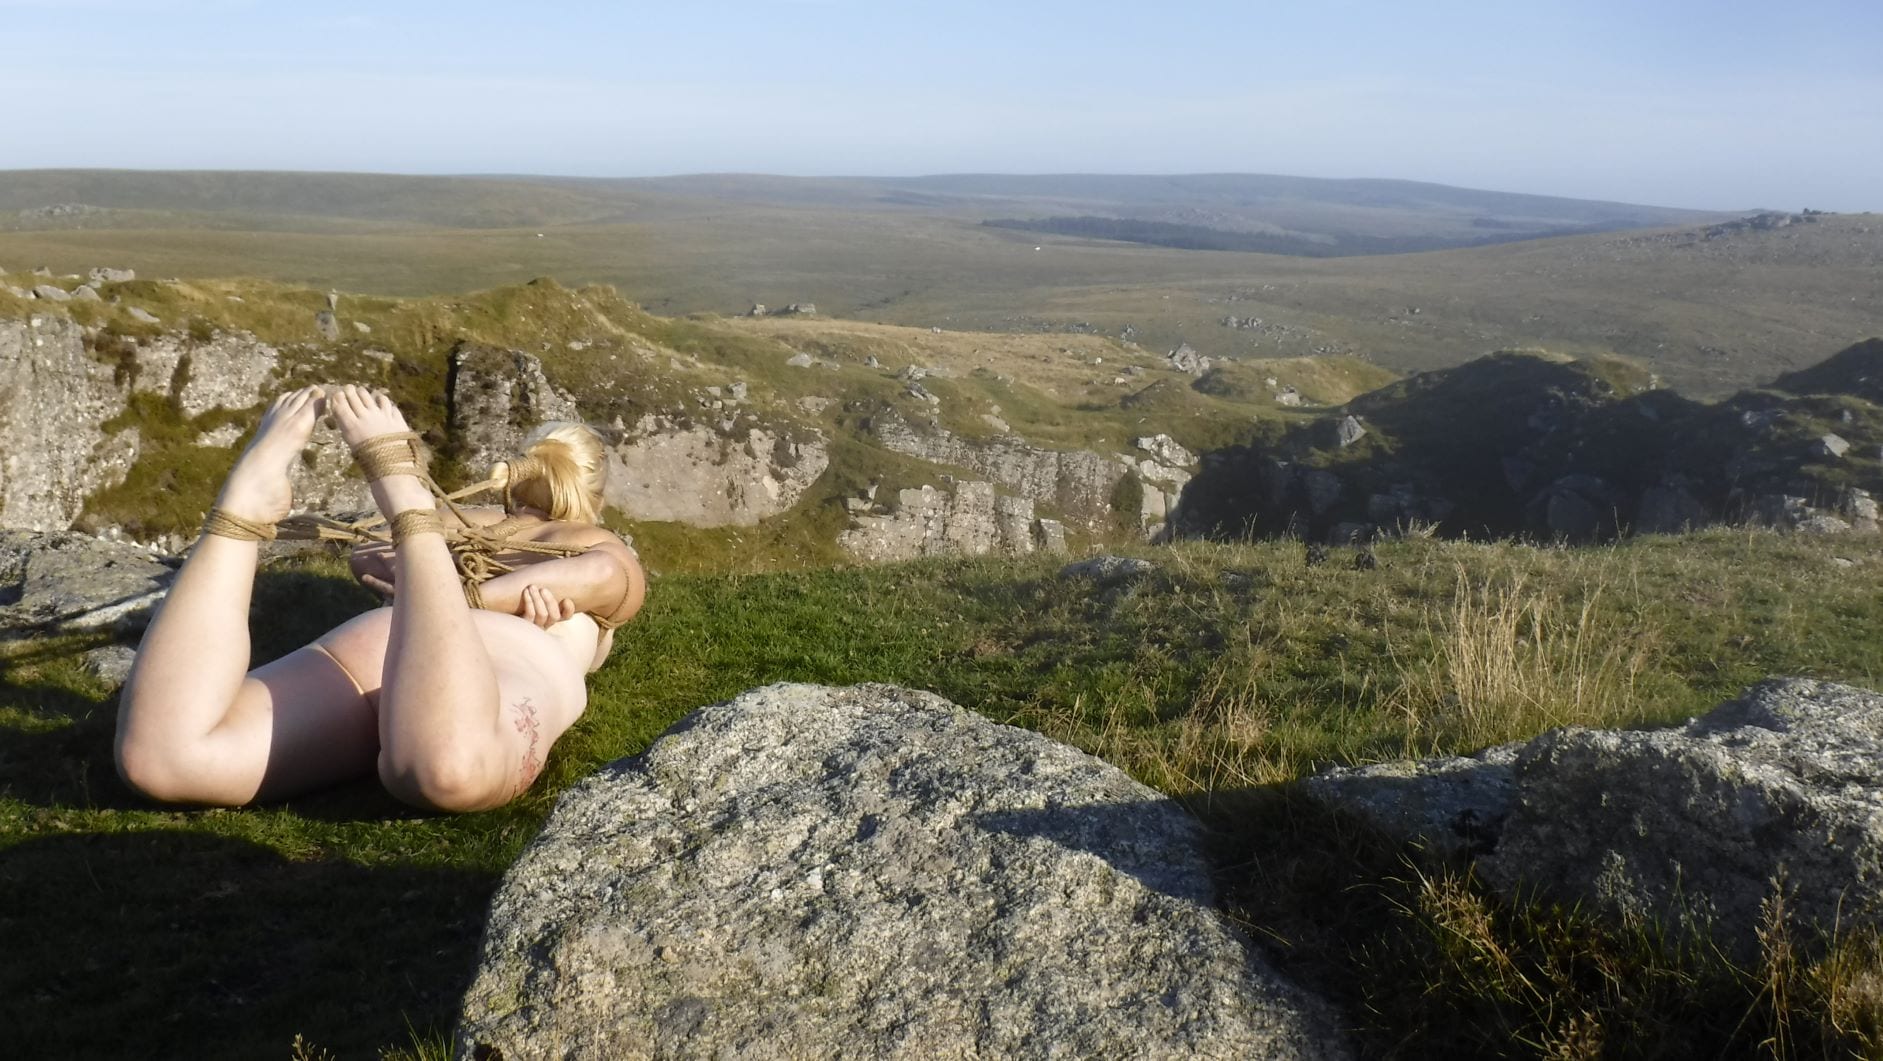 Barefoot sub hogtied on Swell tor quarry